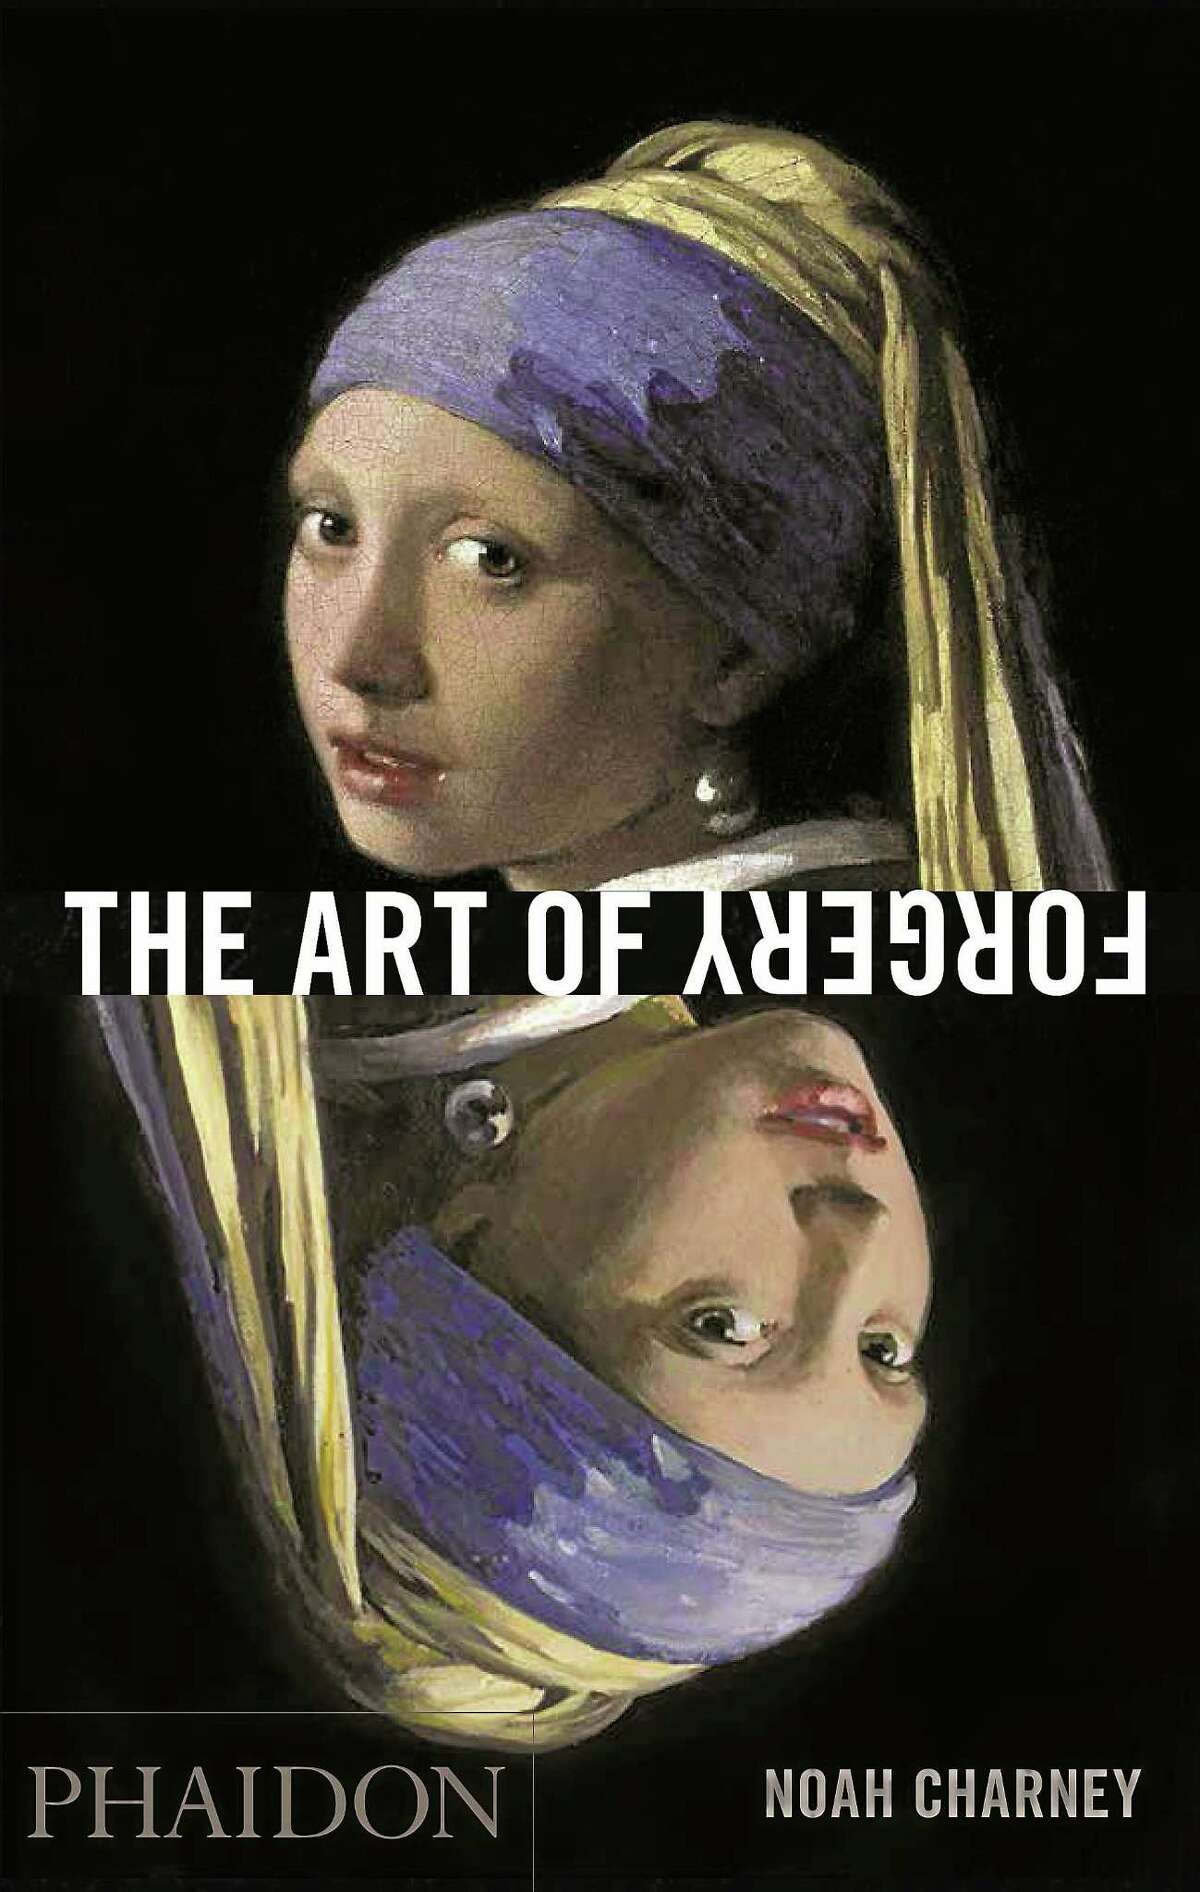 The cover the book "Art of Forgery" by Noah Charney, (Courtesy Phaidon www.phaidon.com)